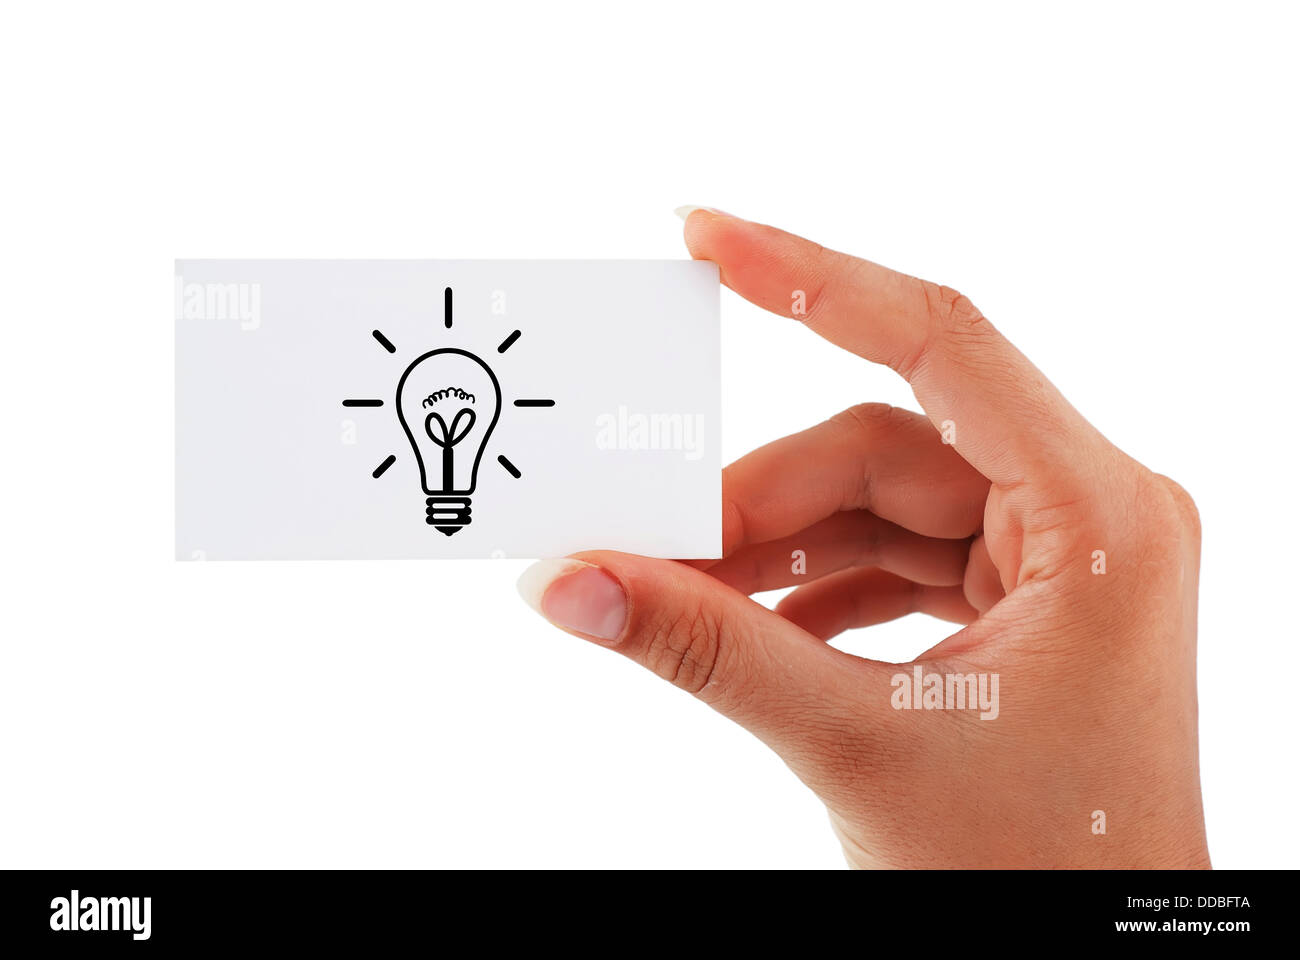 Blank business card Banque D'Images